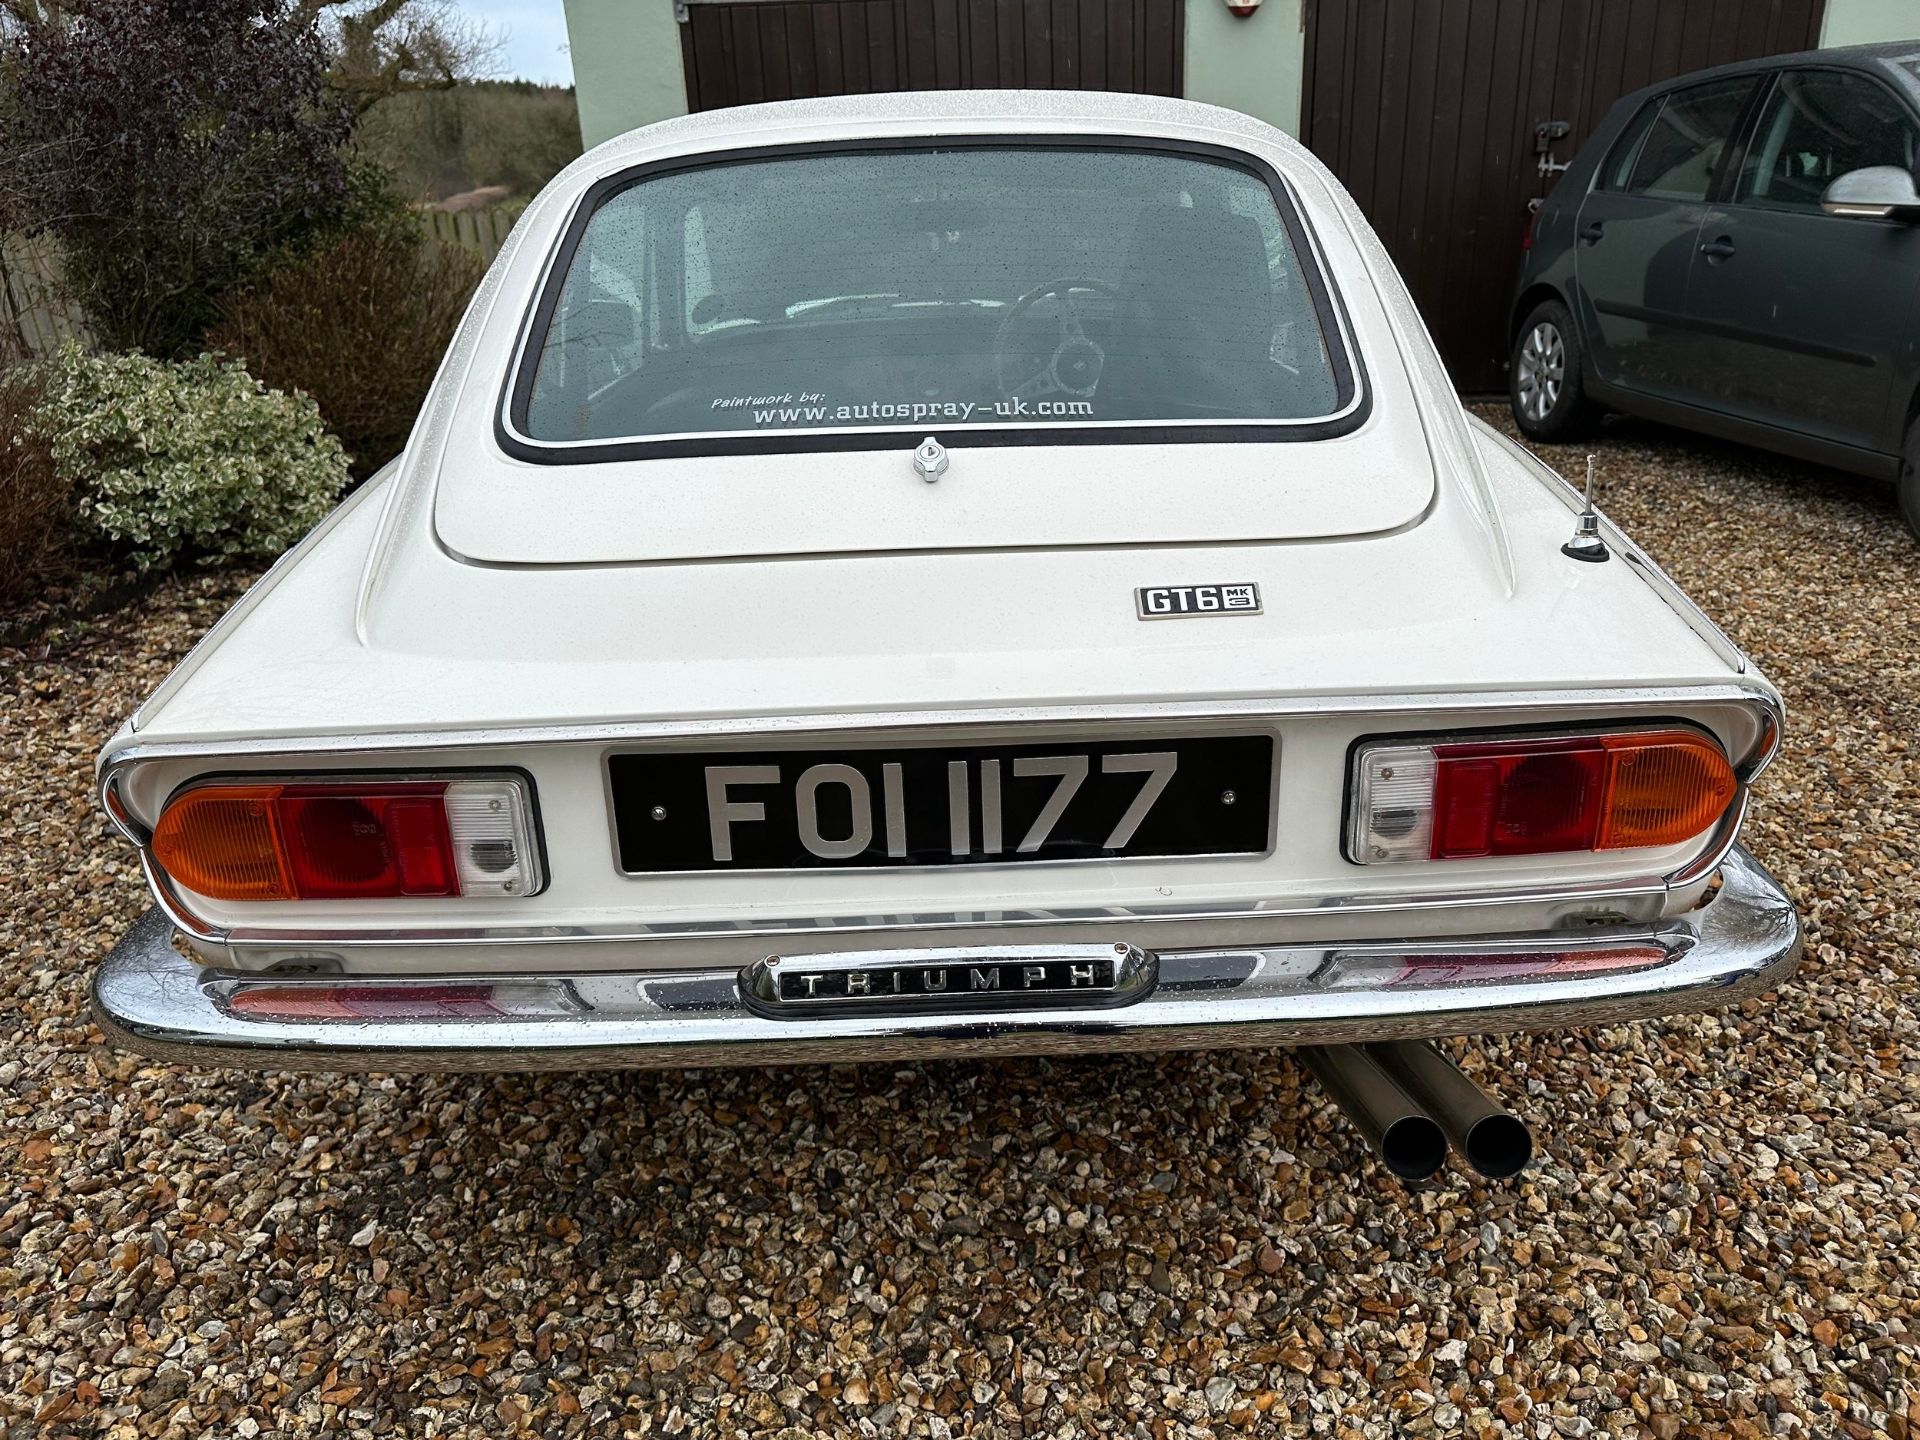 1973 Triumph GT6 Registration number FOI 1177 Chassis number KE145270 Engine number 24517 White with - Image 11 of 34